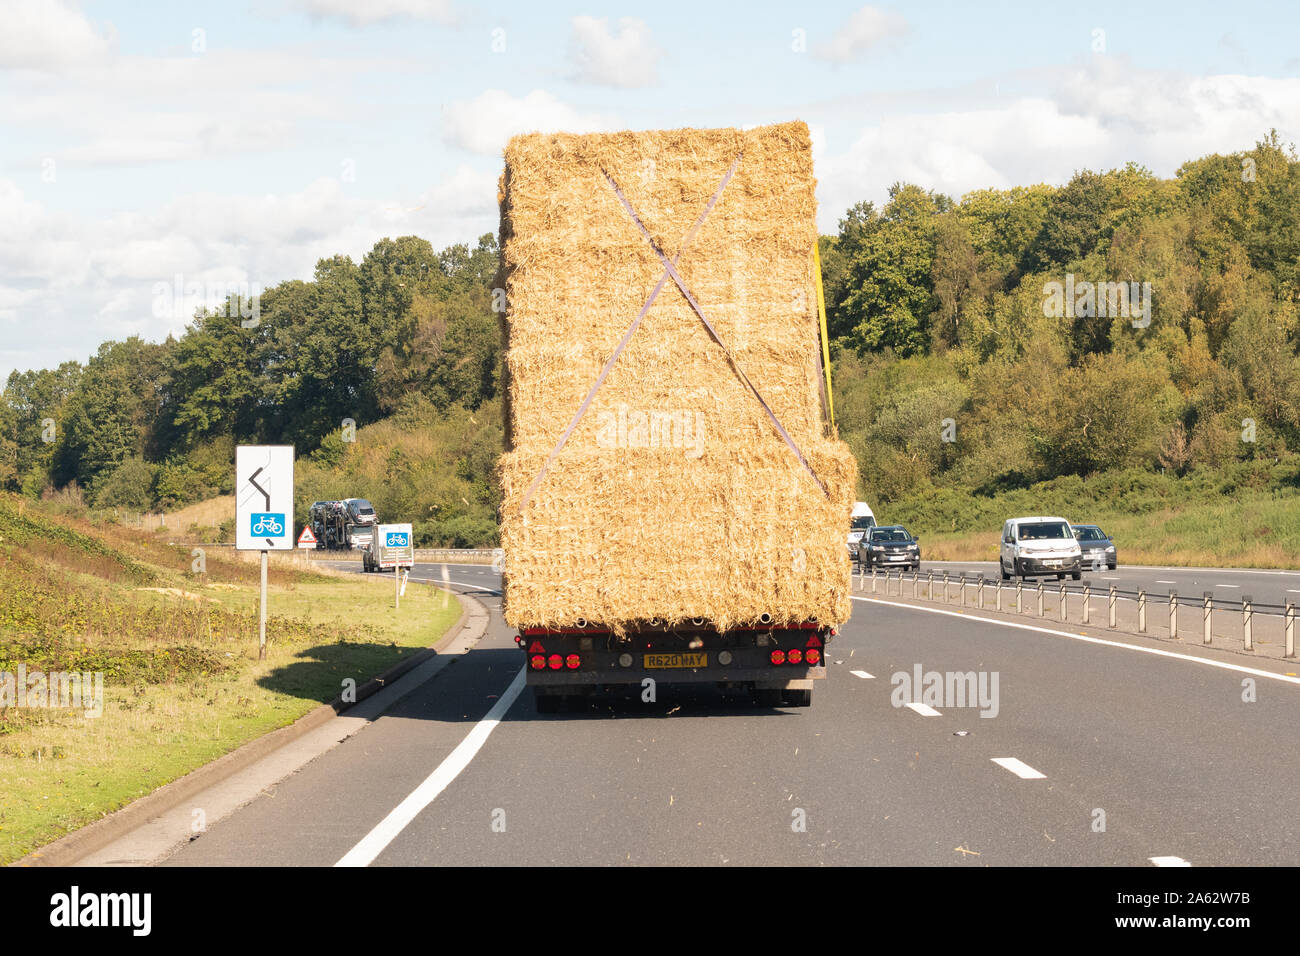 Transporting bales of straw by lorry - UK Stock Photo